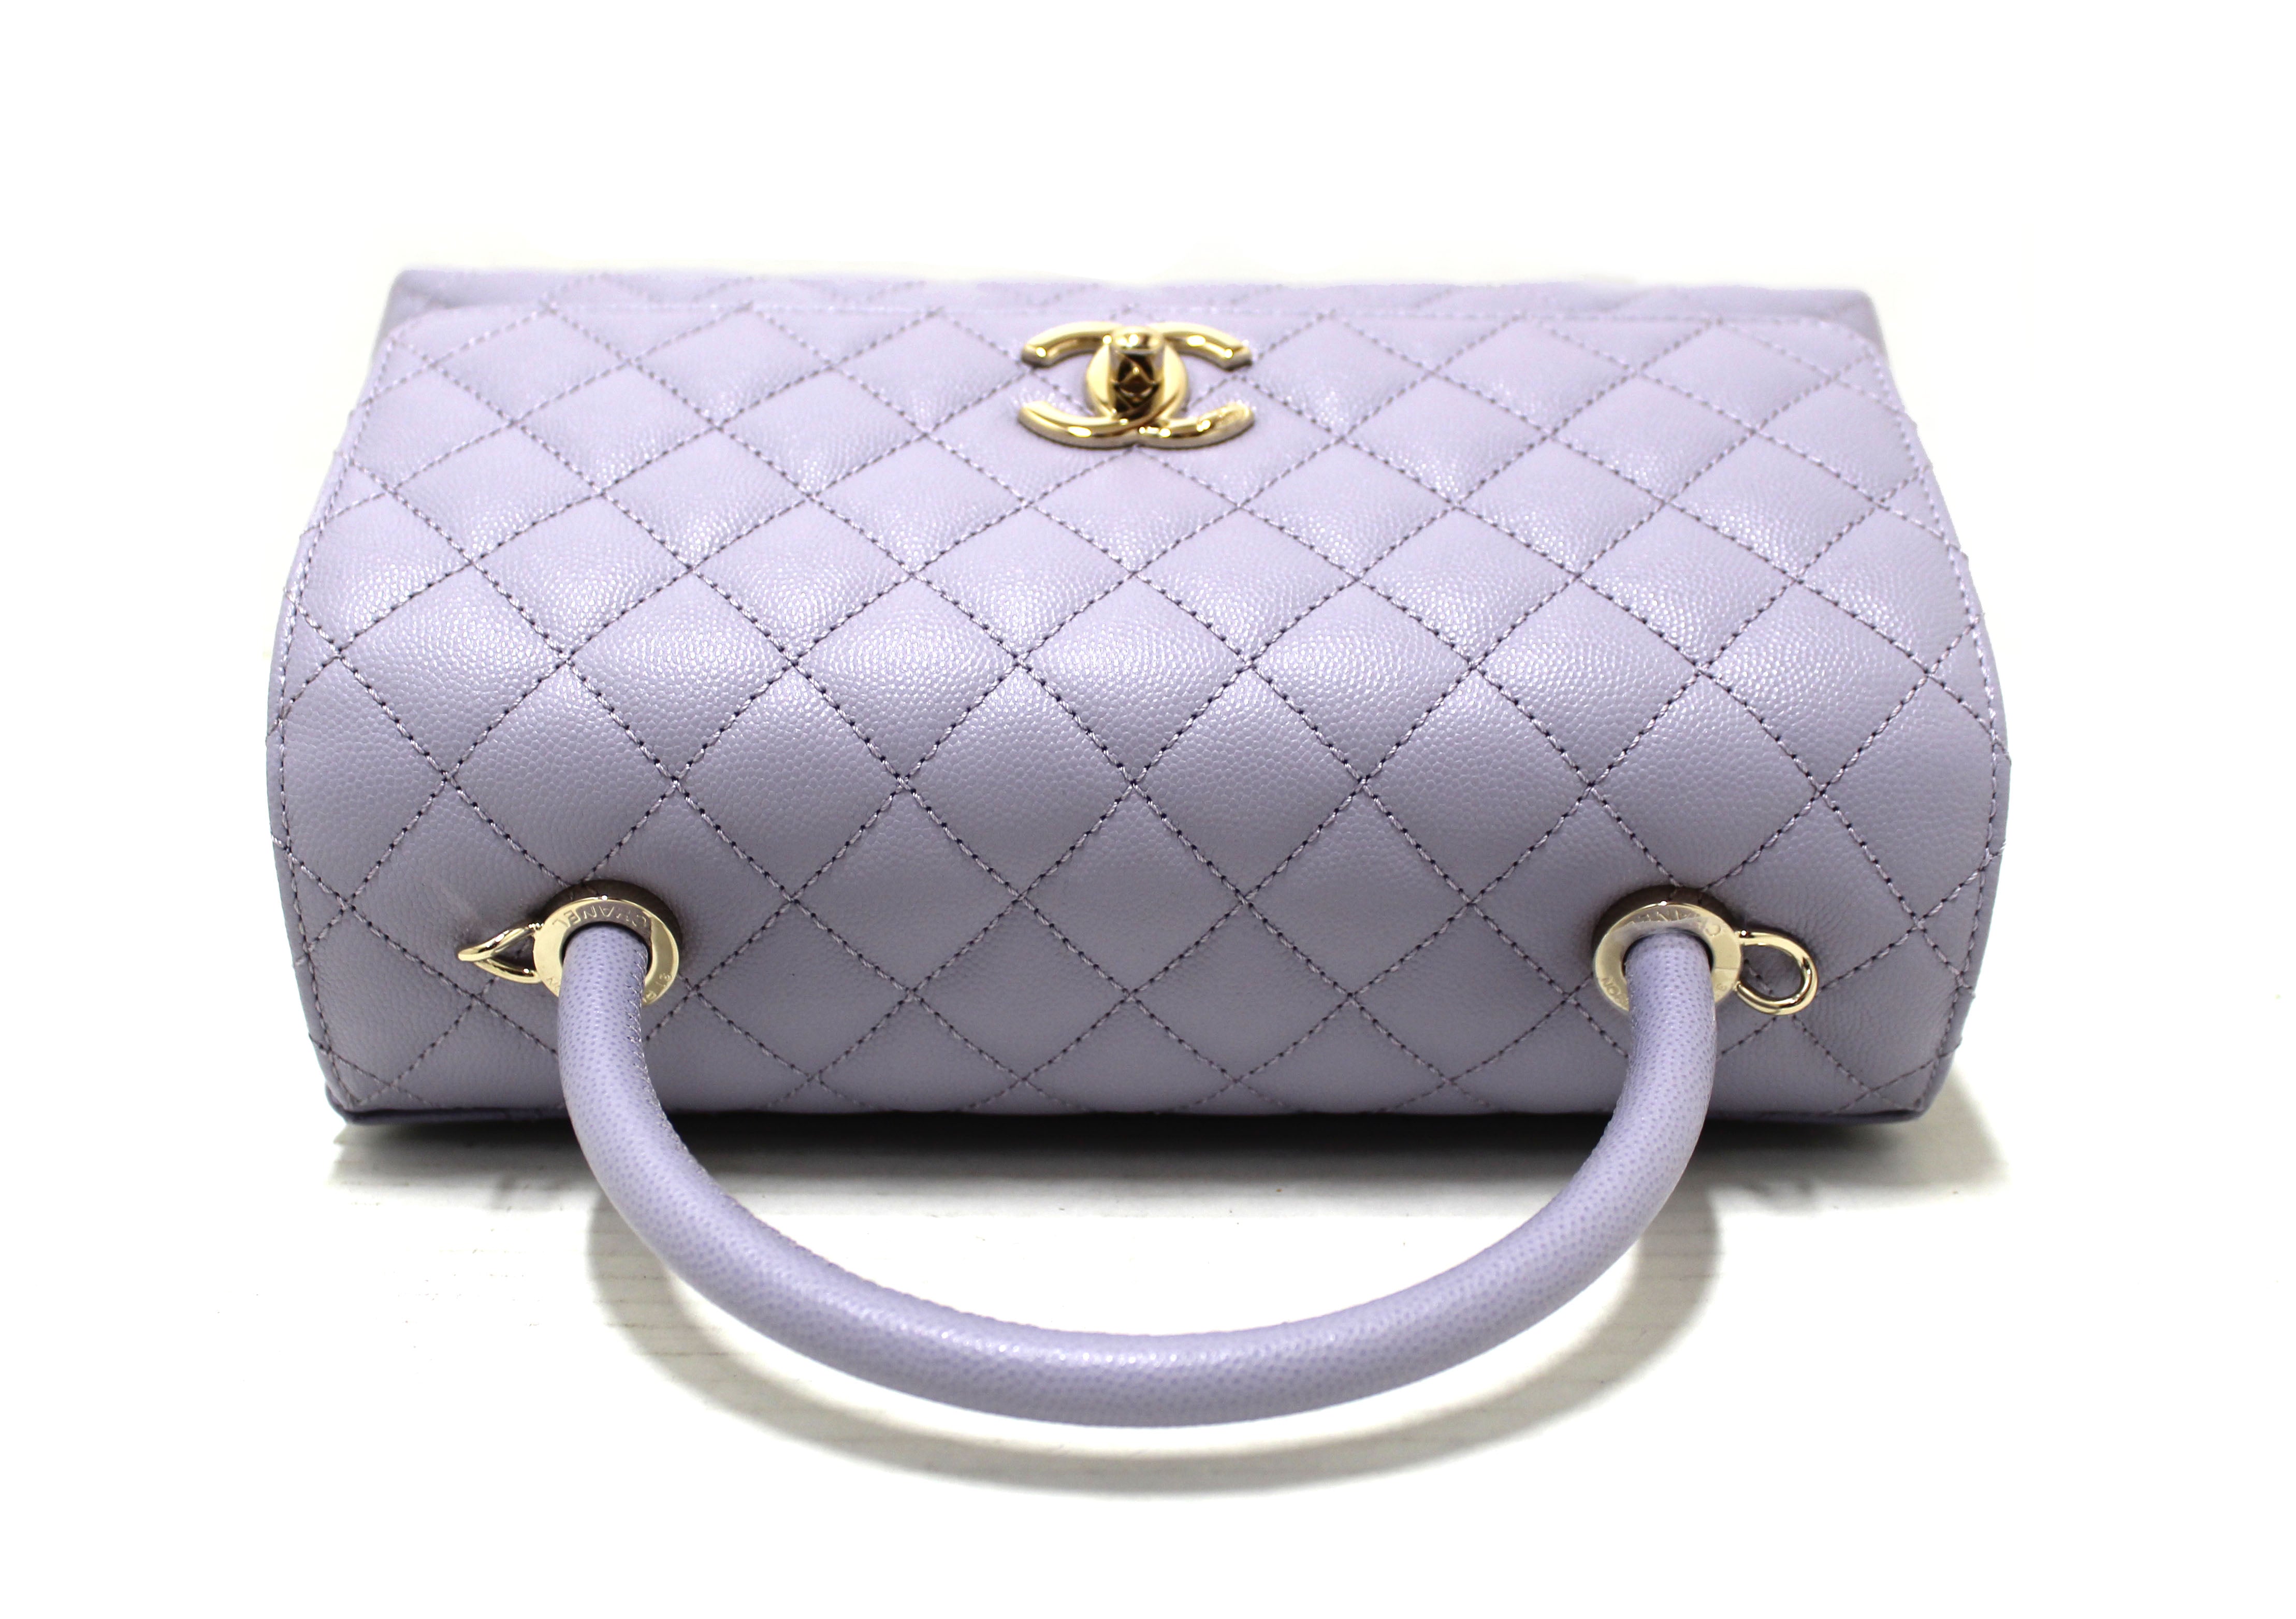 Authentic Chanel Light Purple Quilted Caviar Leather Medium CoCo Handle Flap Bag